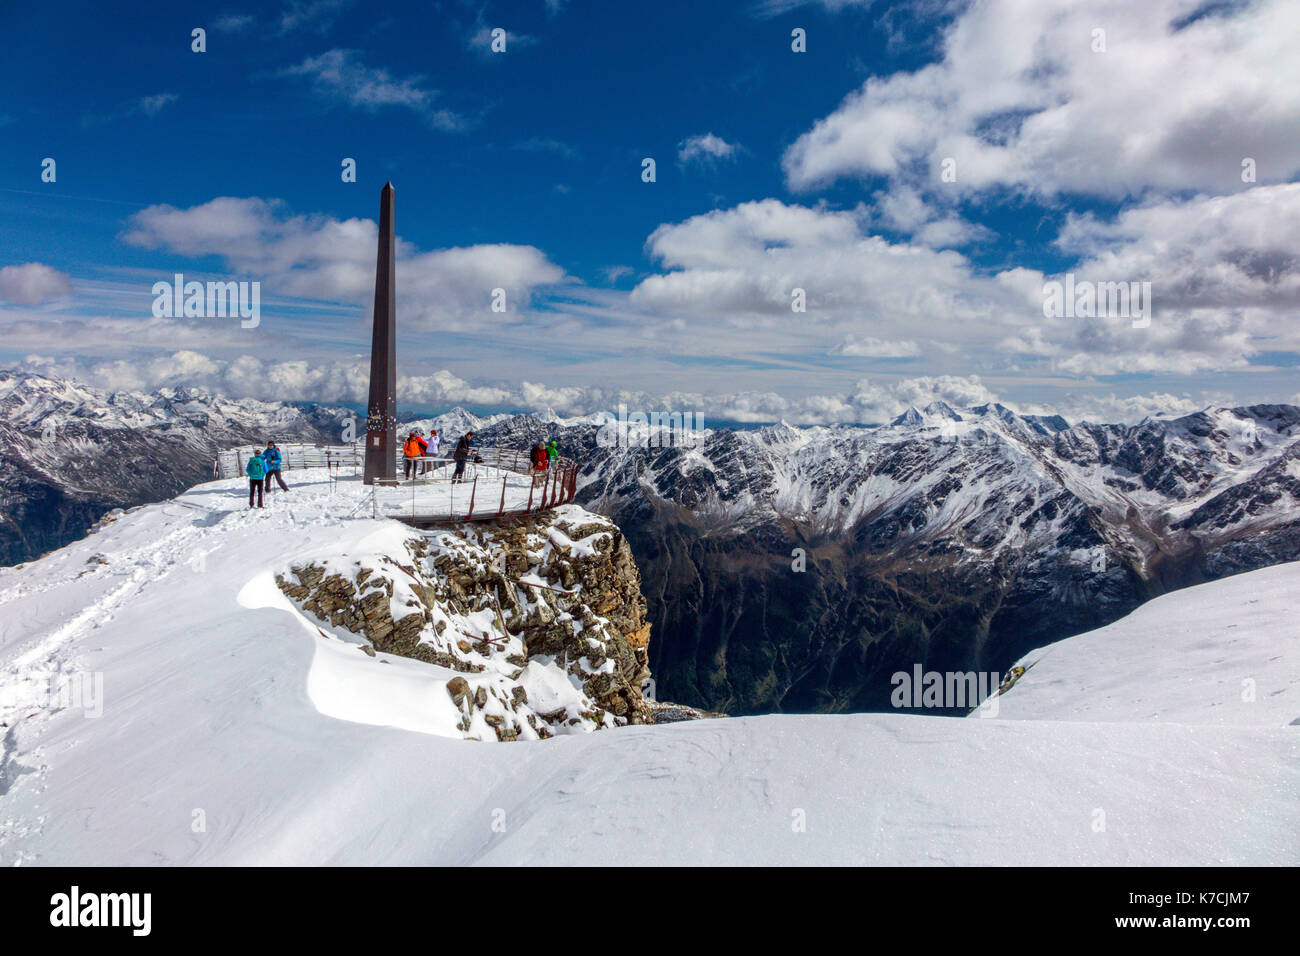 Hikers at snowy viewpoint, Schwarze Schneid cable car, Solden, Austria Stock Photo